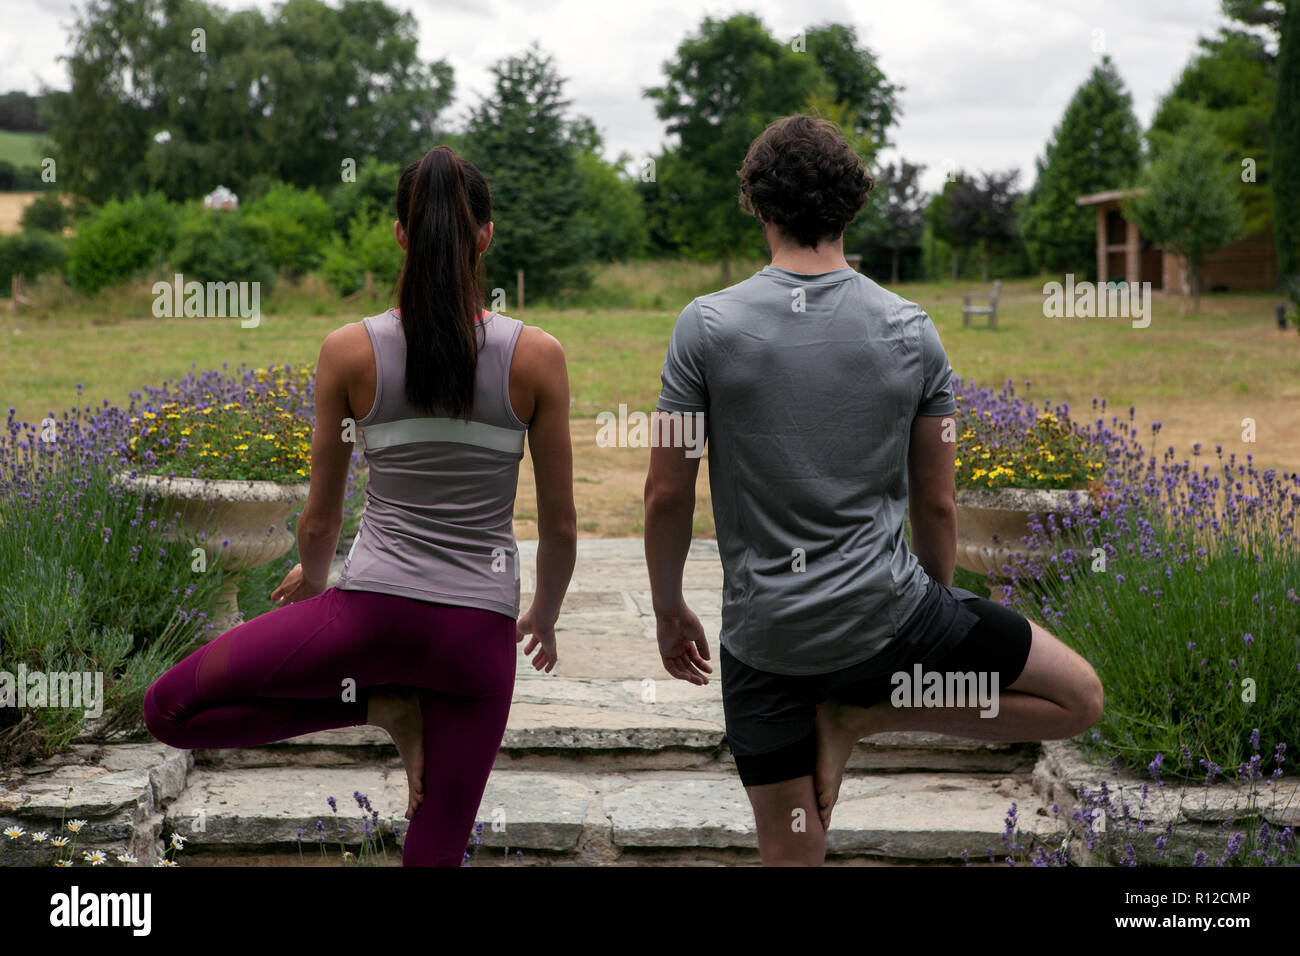 Man and woman practicing yoga in garden, rear view of tree pose Stock Photo